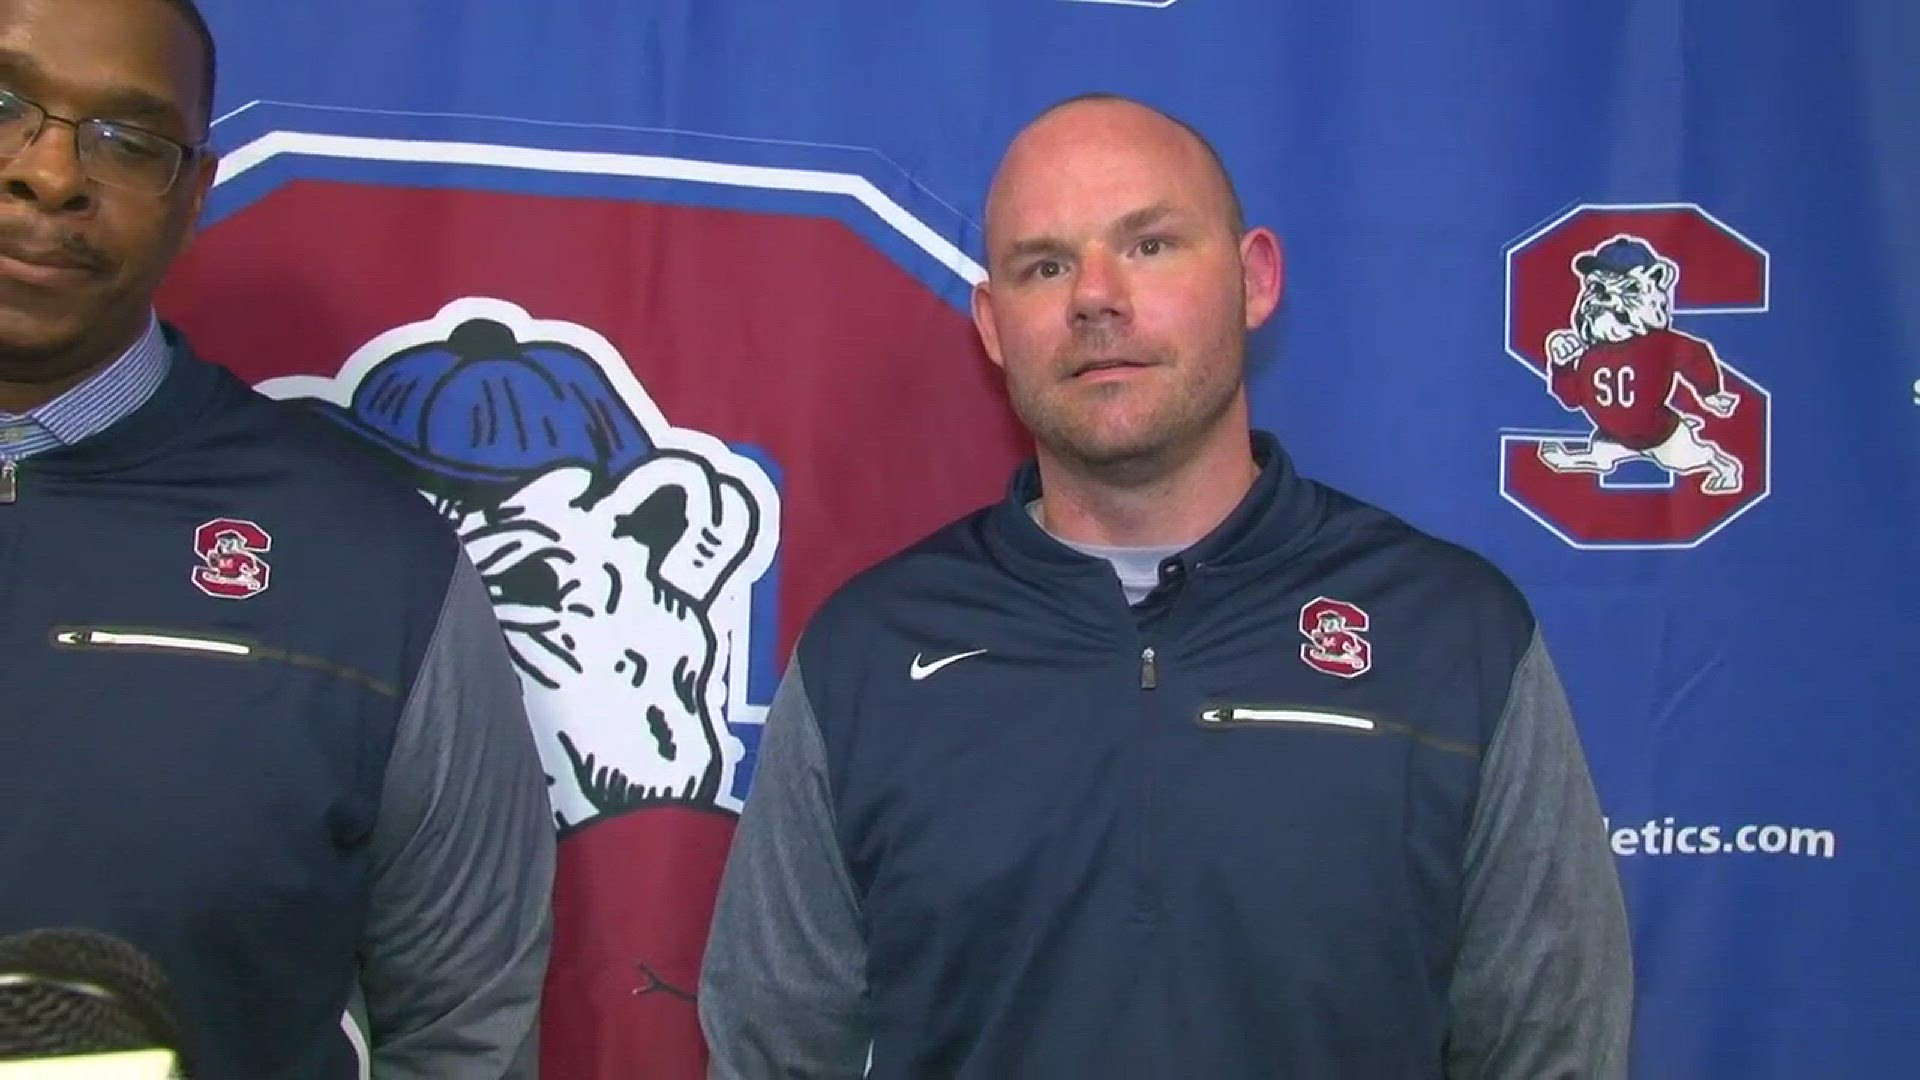 Former Newberry offensive coordinator Bennett Swygert and offensive line coach Na'Shan Goddard go down 1-26 from Newberry to SC State. They aim to help revitalize the Bulldog's offense.